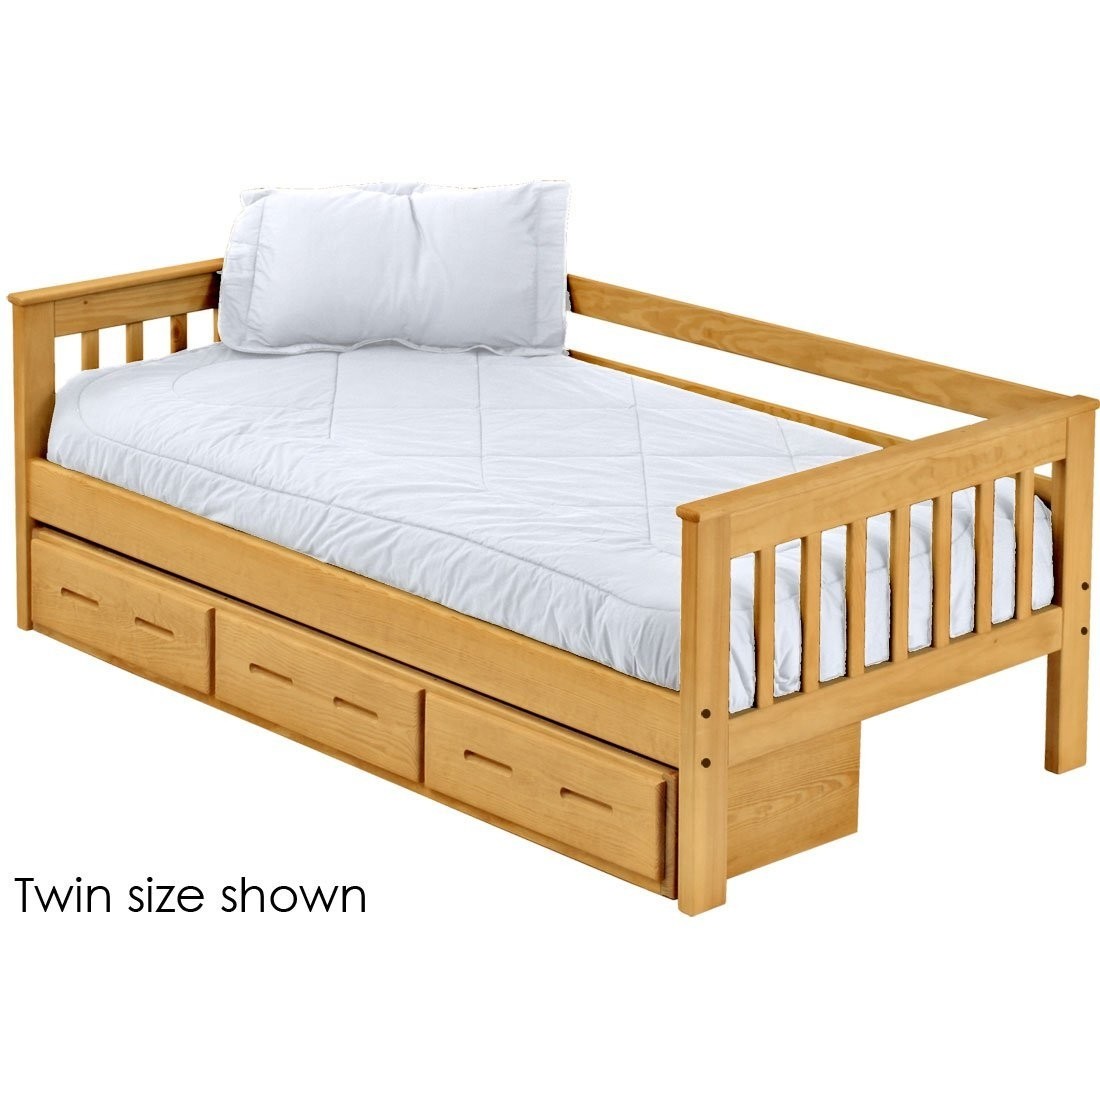 Crate mission day bed with drawers 29in high twin size